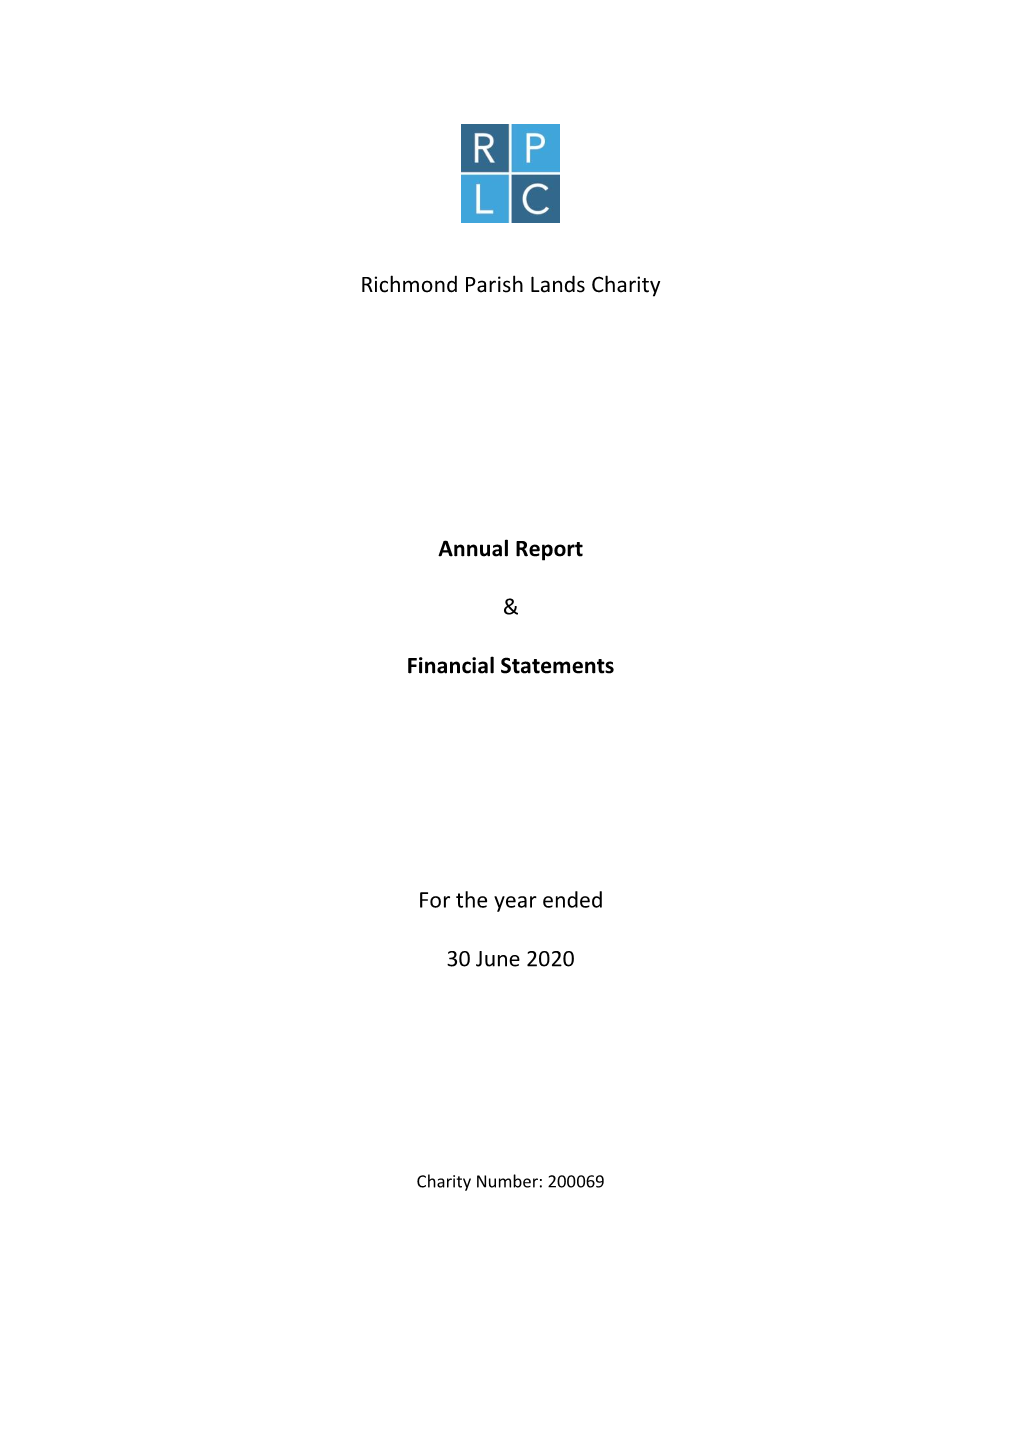 Richmond Parish Lands Charity Annual Report & Financial Statements for the Year Ended 30 June 2020